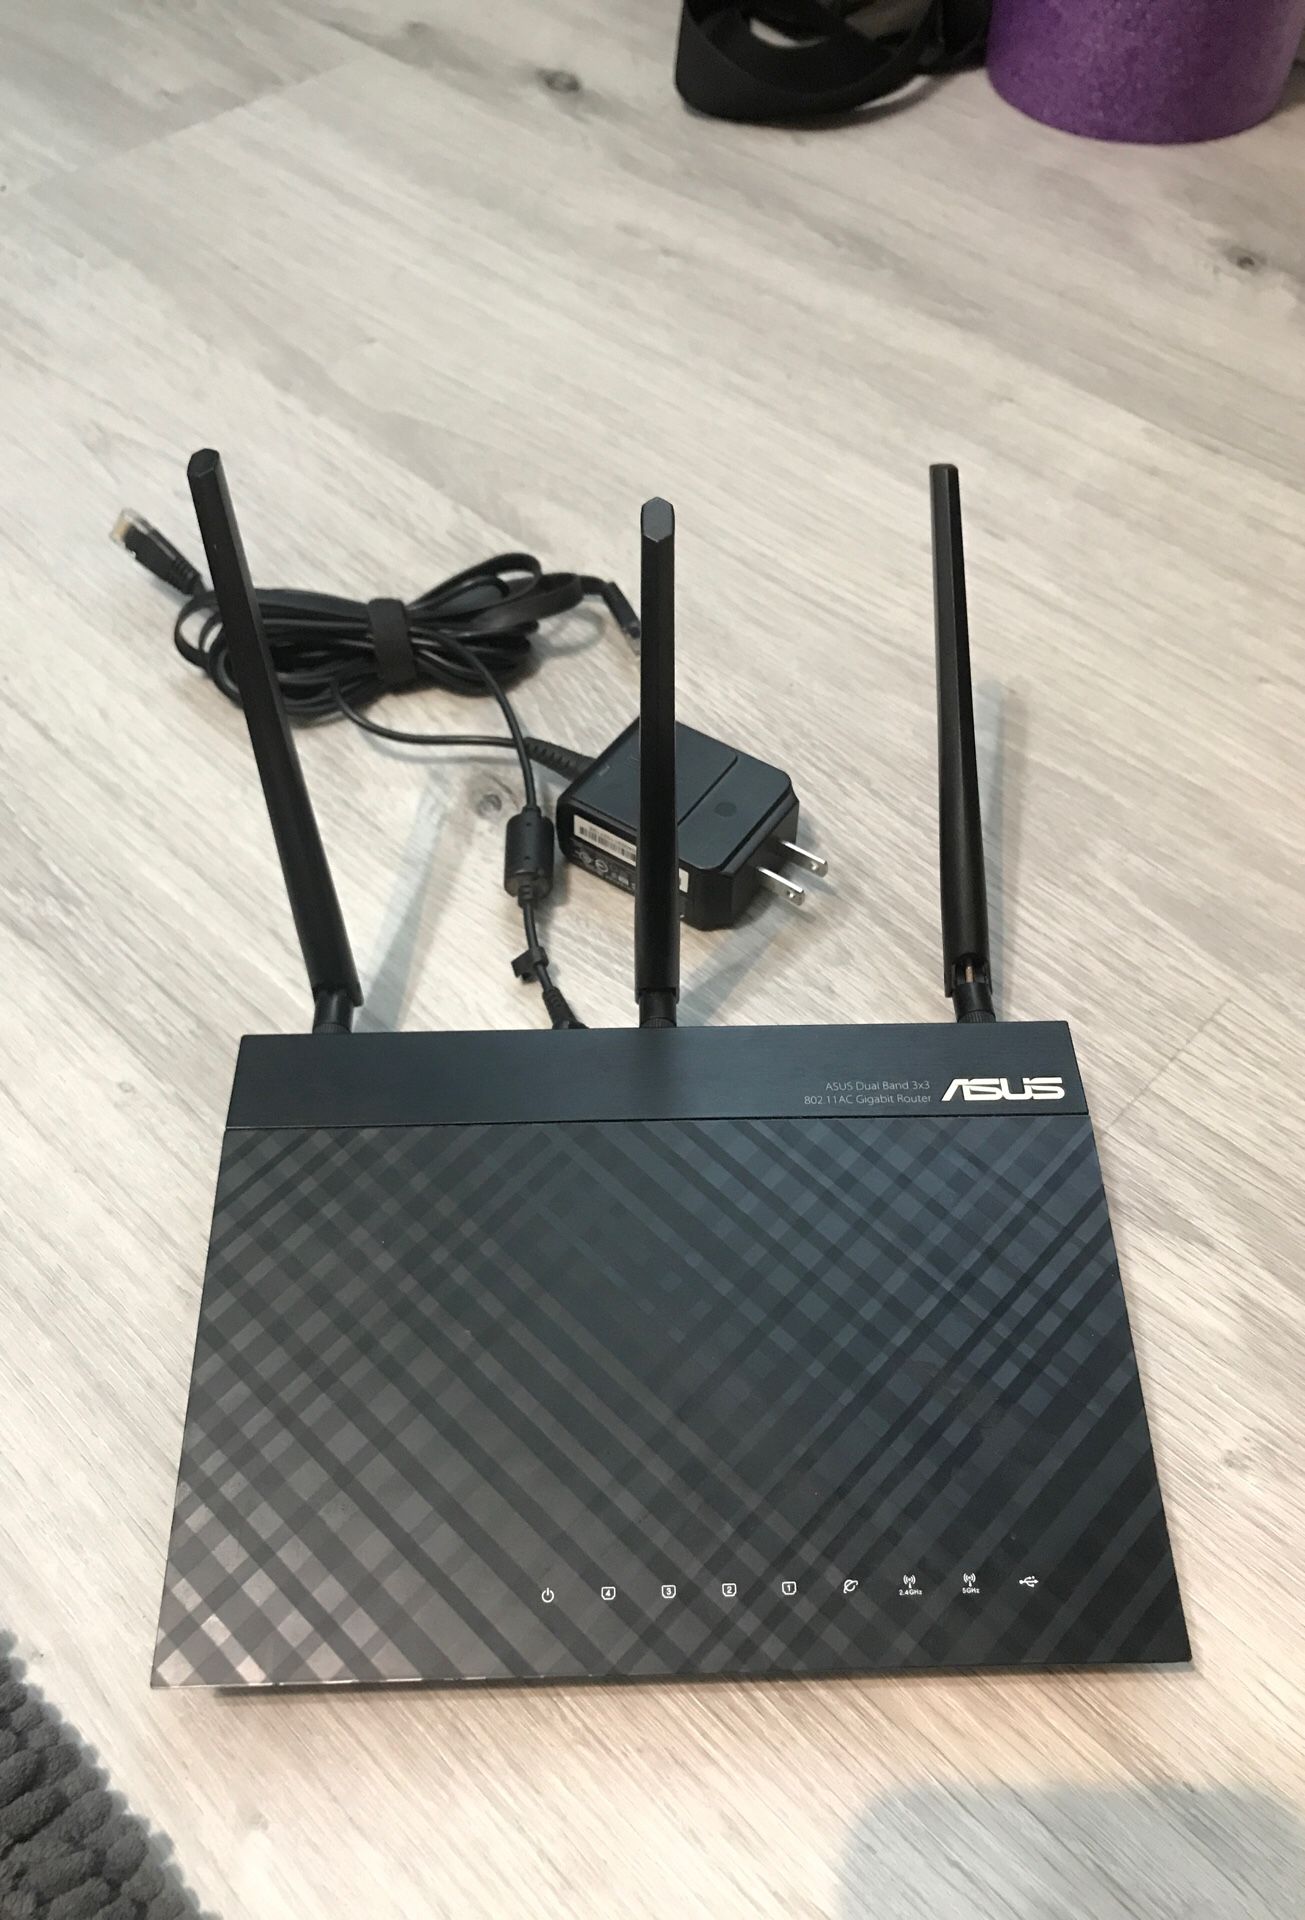 Asus Dual Band WiFi Router with power cable and Ethernet cable